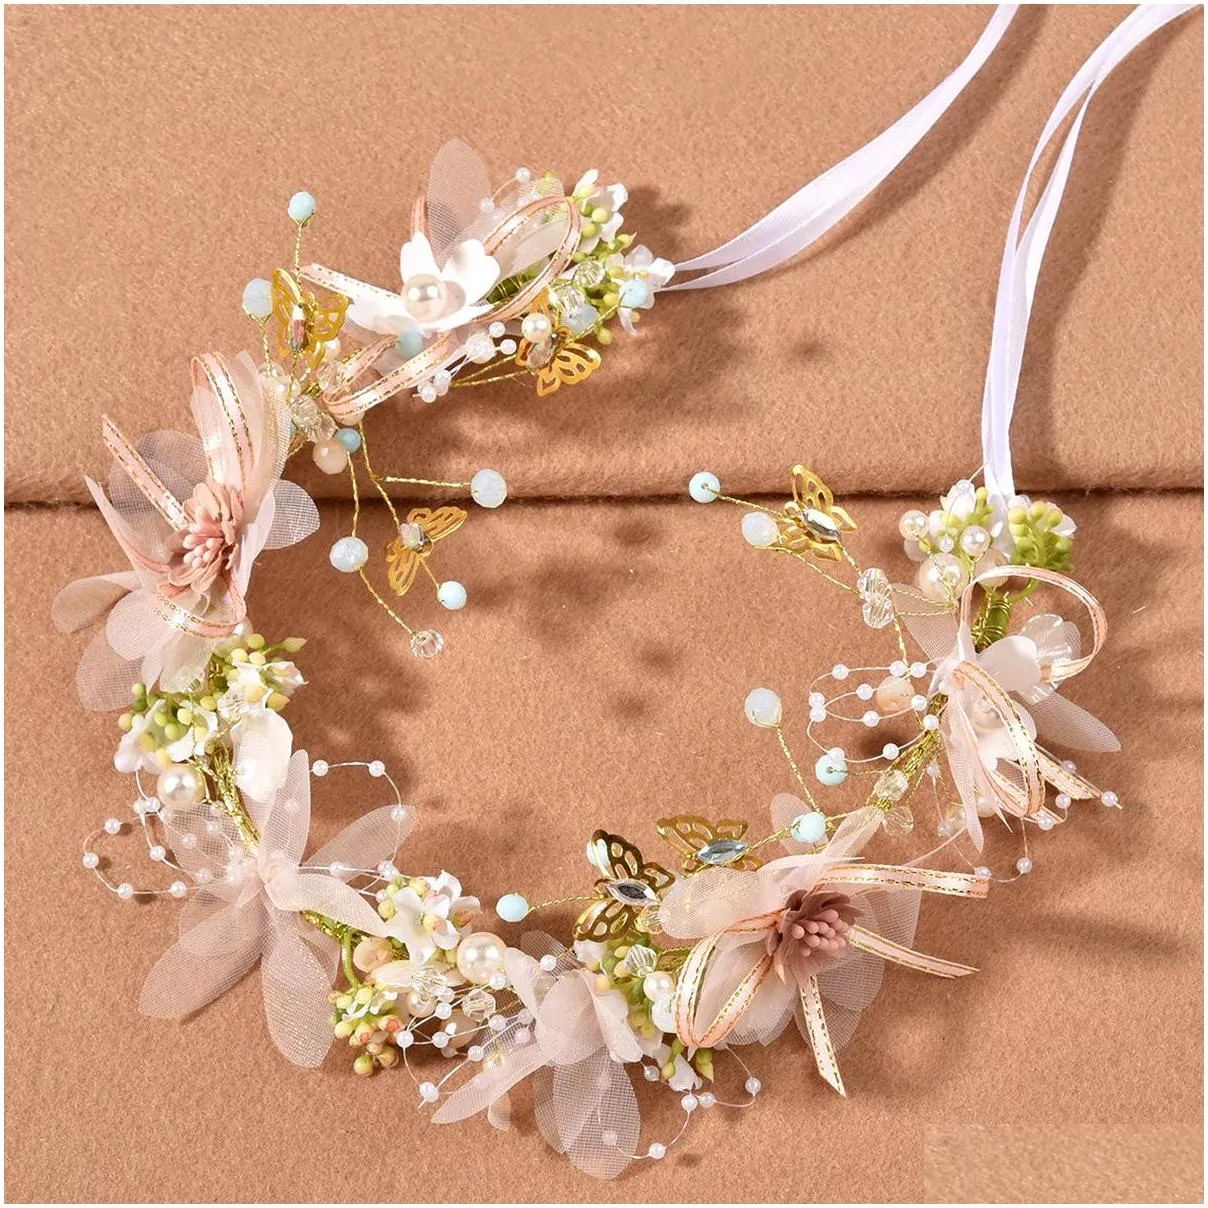 floral crowns for girls fairy tale flowers bridal tiara headpieces pearls beaded ribbon headband wedding party hair accessories women headdress